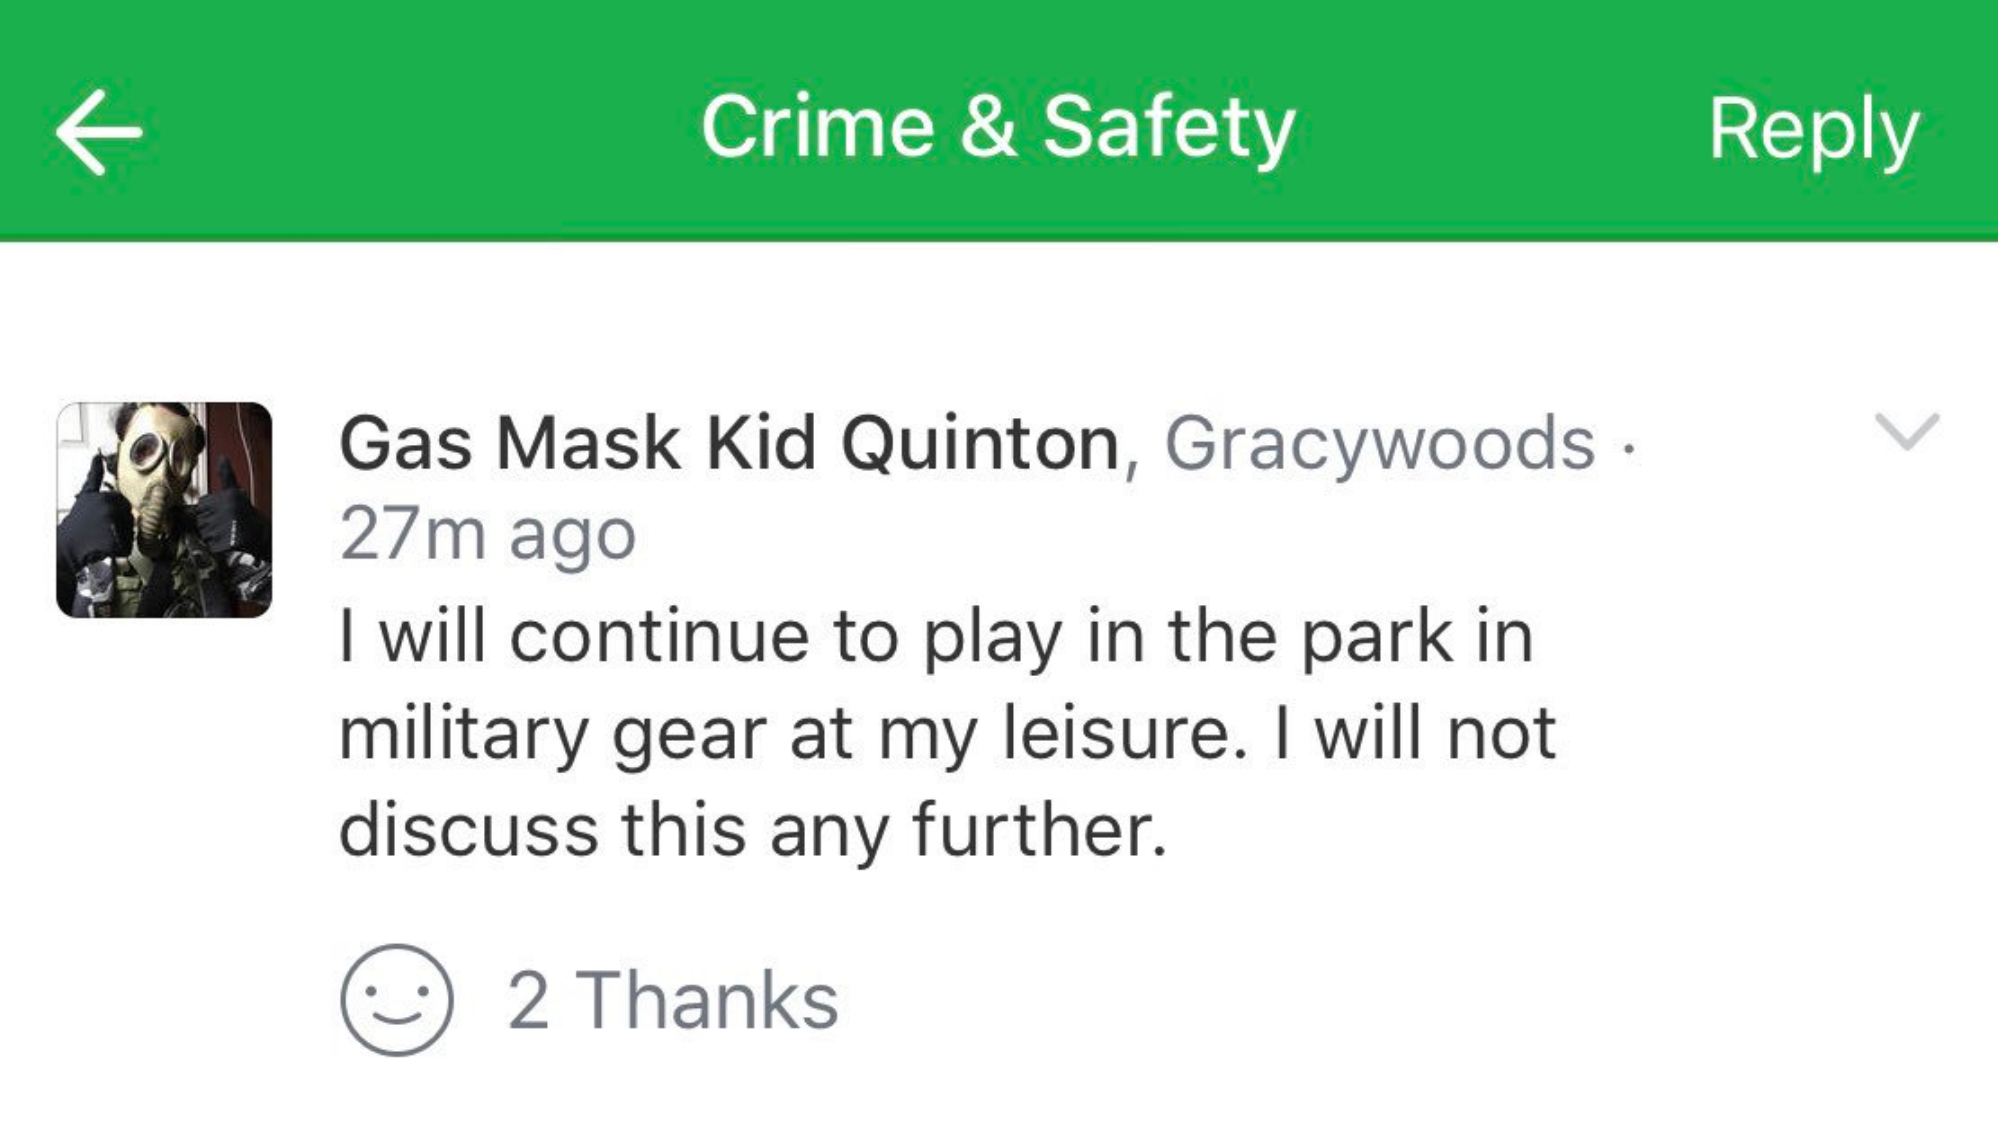 safety at work - Crime & Safety Gas Mask Kid Quinton, Gracywoods. 27m ago I will continue to play in the park in military gear at my leisure. I will not discuss this any further. 2 Thanks